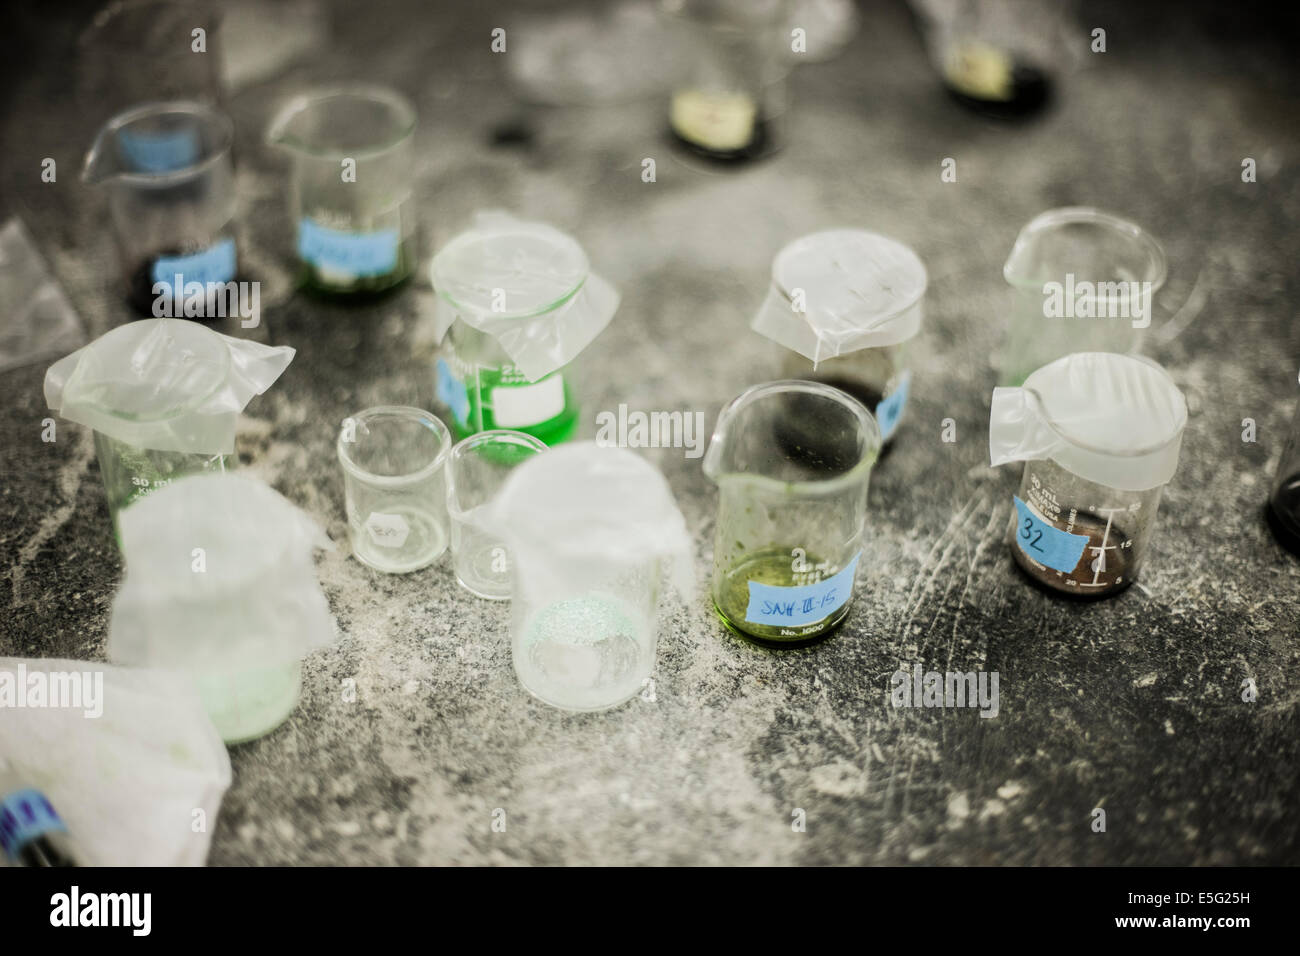 Beakers on messy table Stock Photo